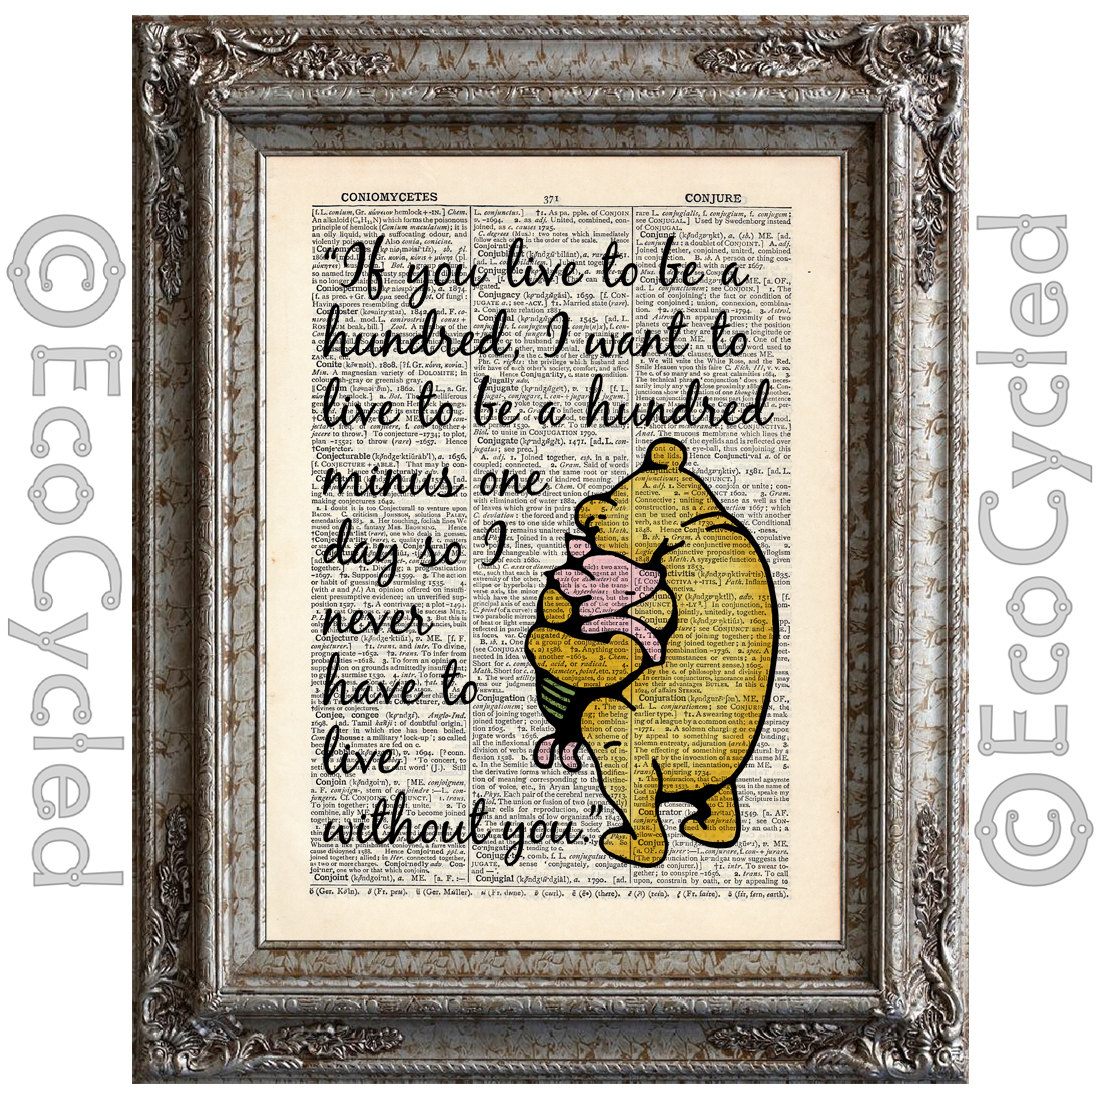 Downloadable Art Love Quote Family Quote If You Live to be 100 Winnie The Pooh Quote Downloadable Prints Printable Art Inspiring